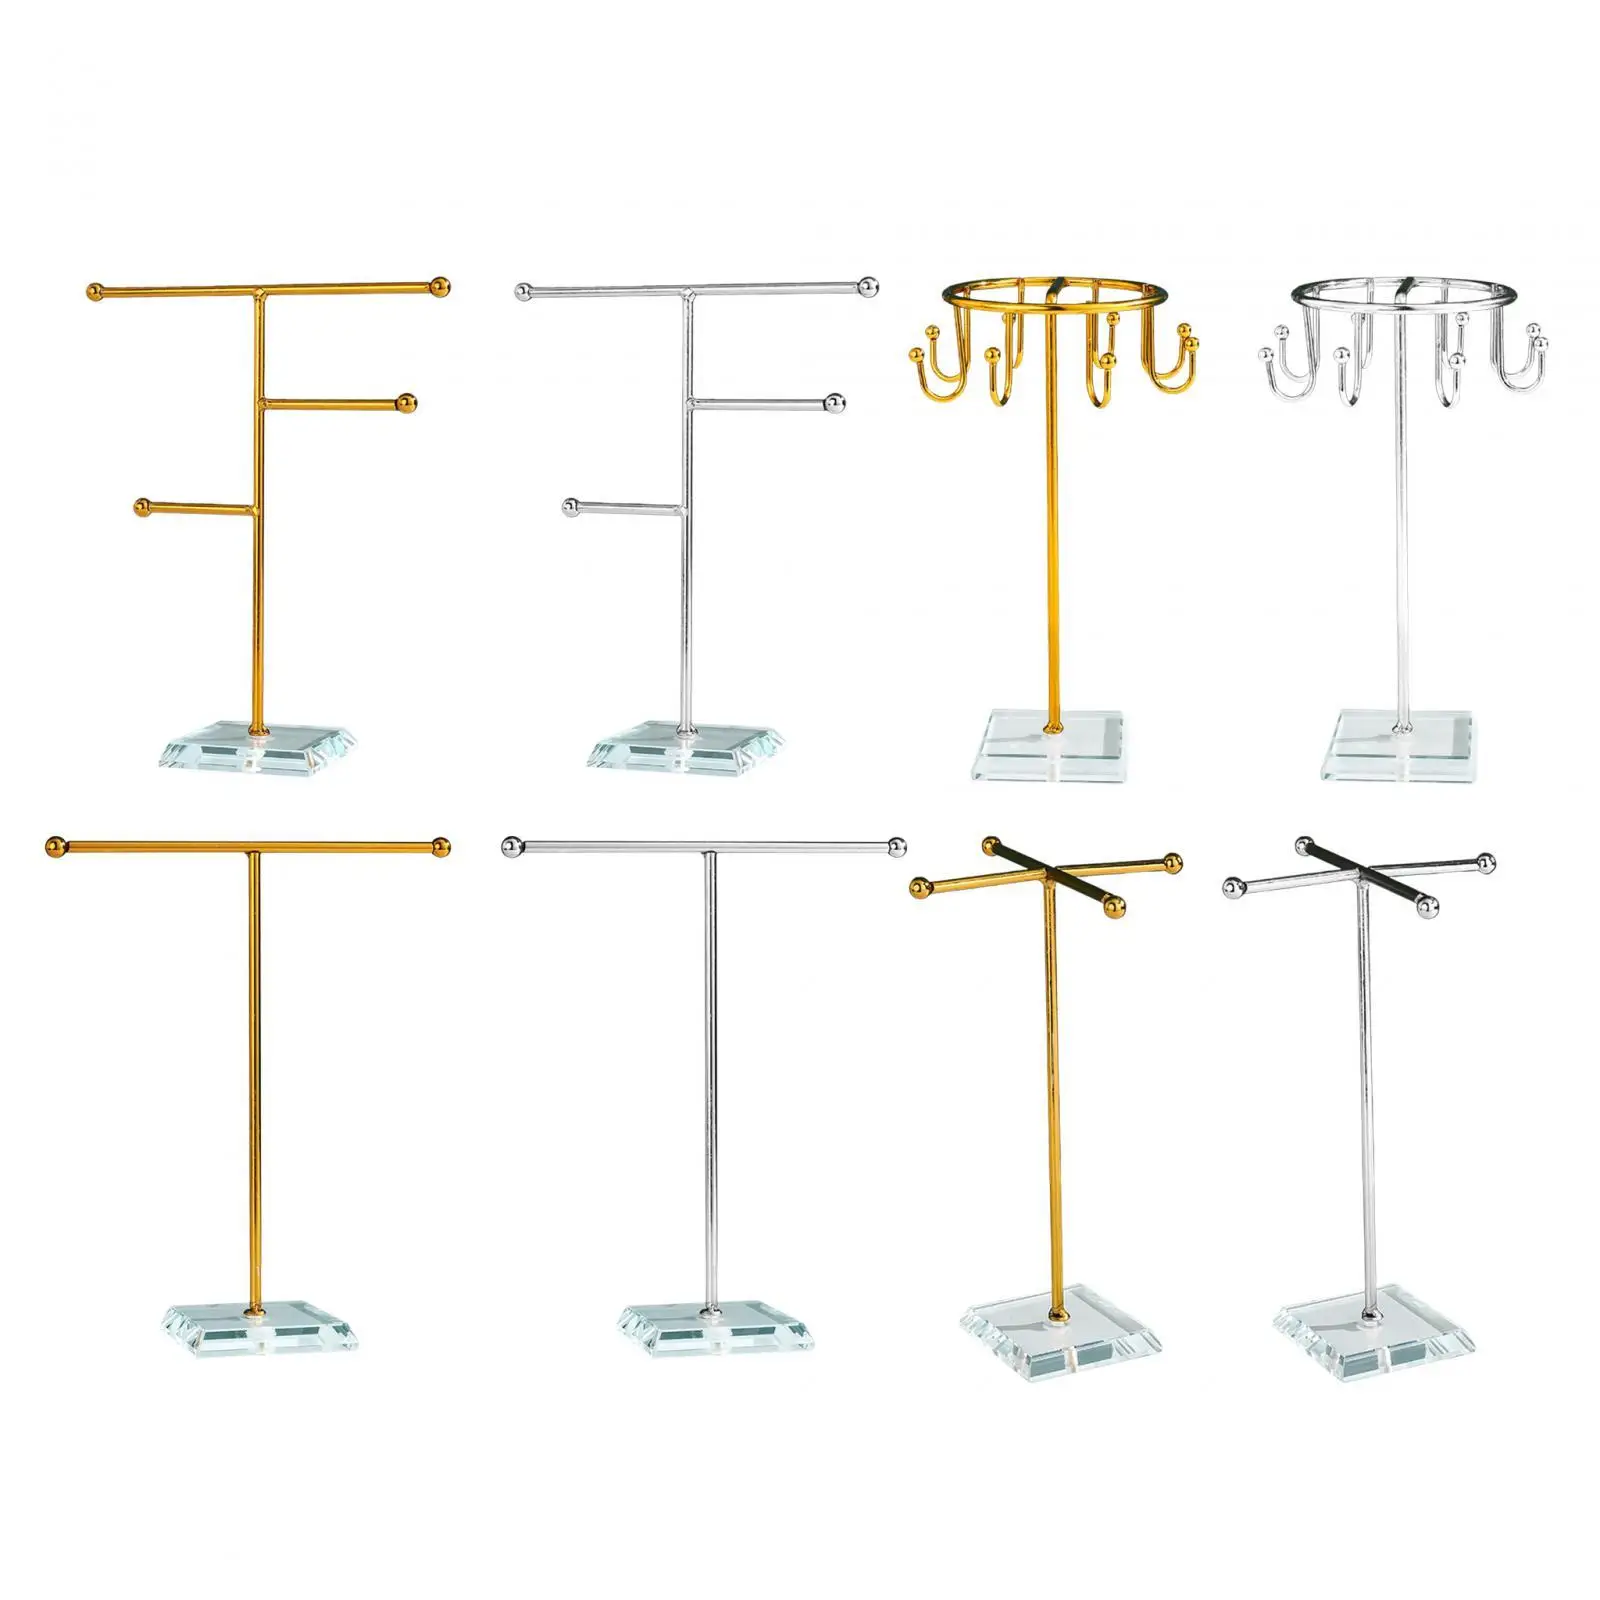 Jewelry Display Stand T Shaped Jewelry Holder for Bracelet Watch Necklaces